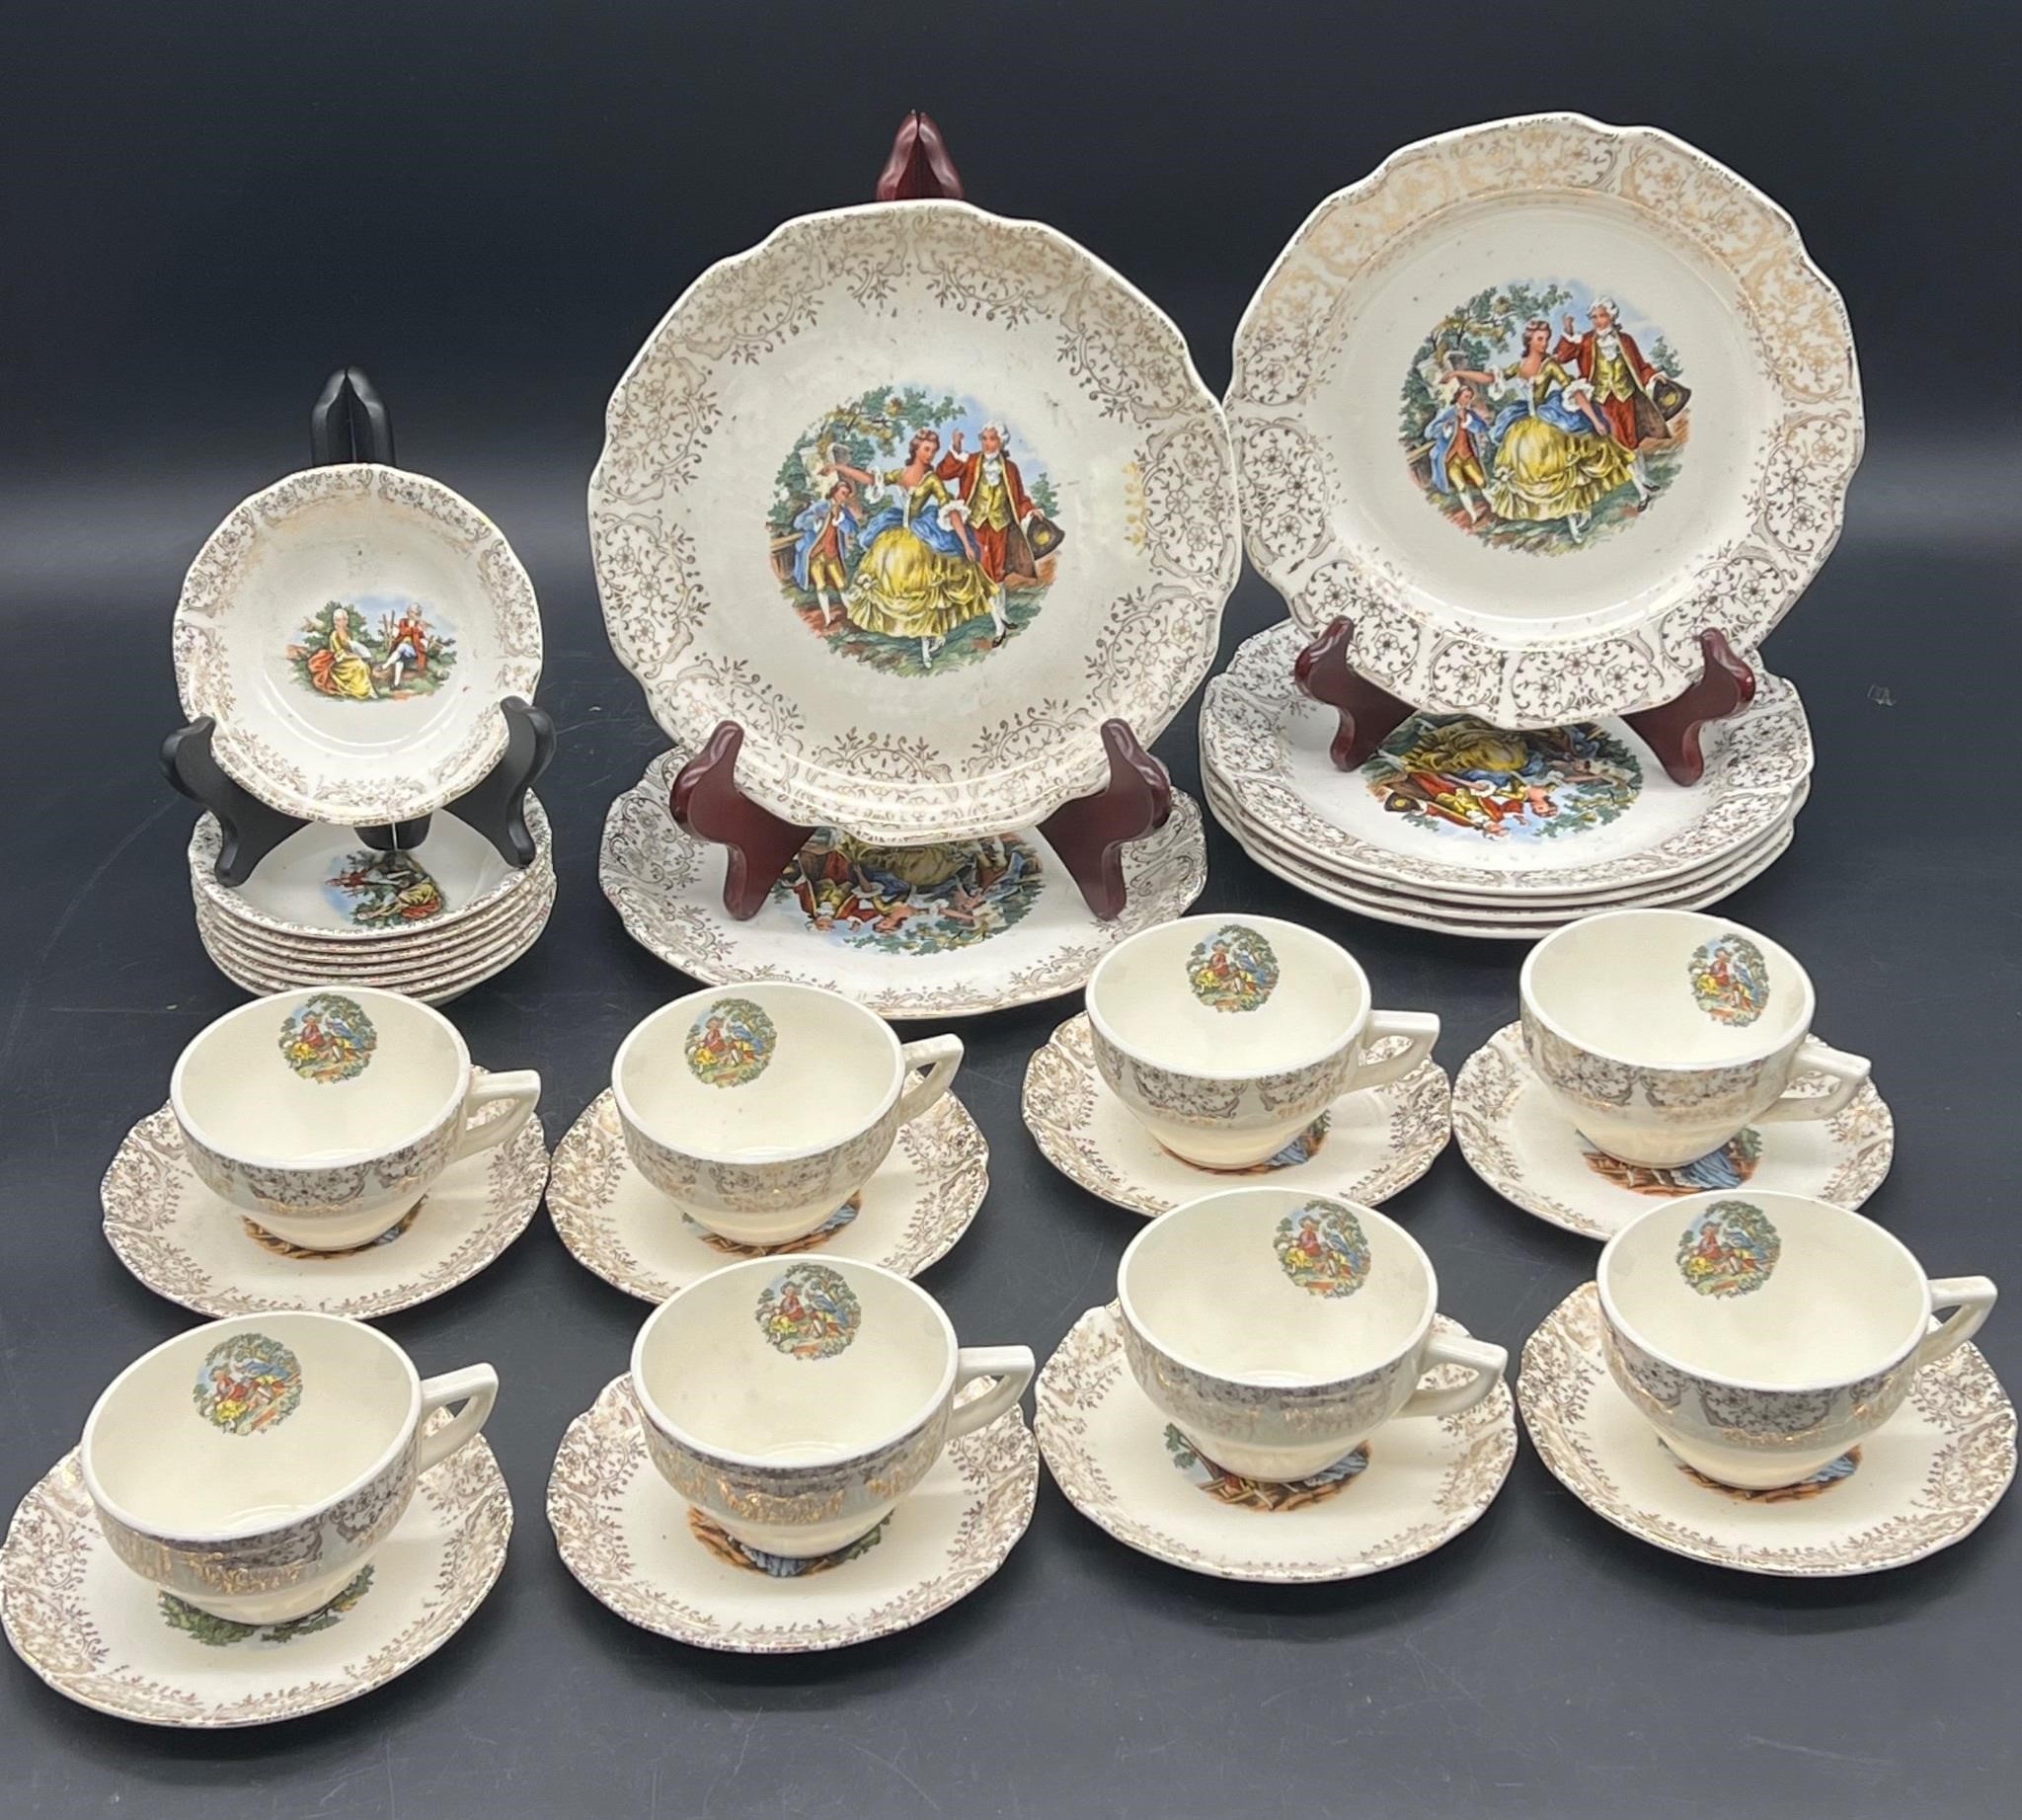 31 PC VTG COLONIAL STYLE GOLD TRIM CHINA